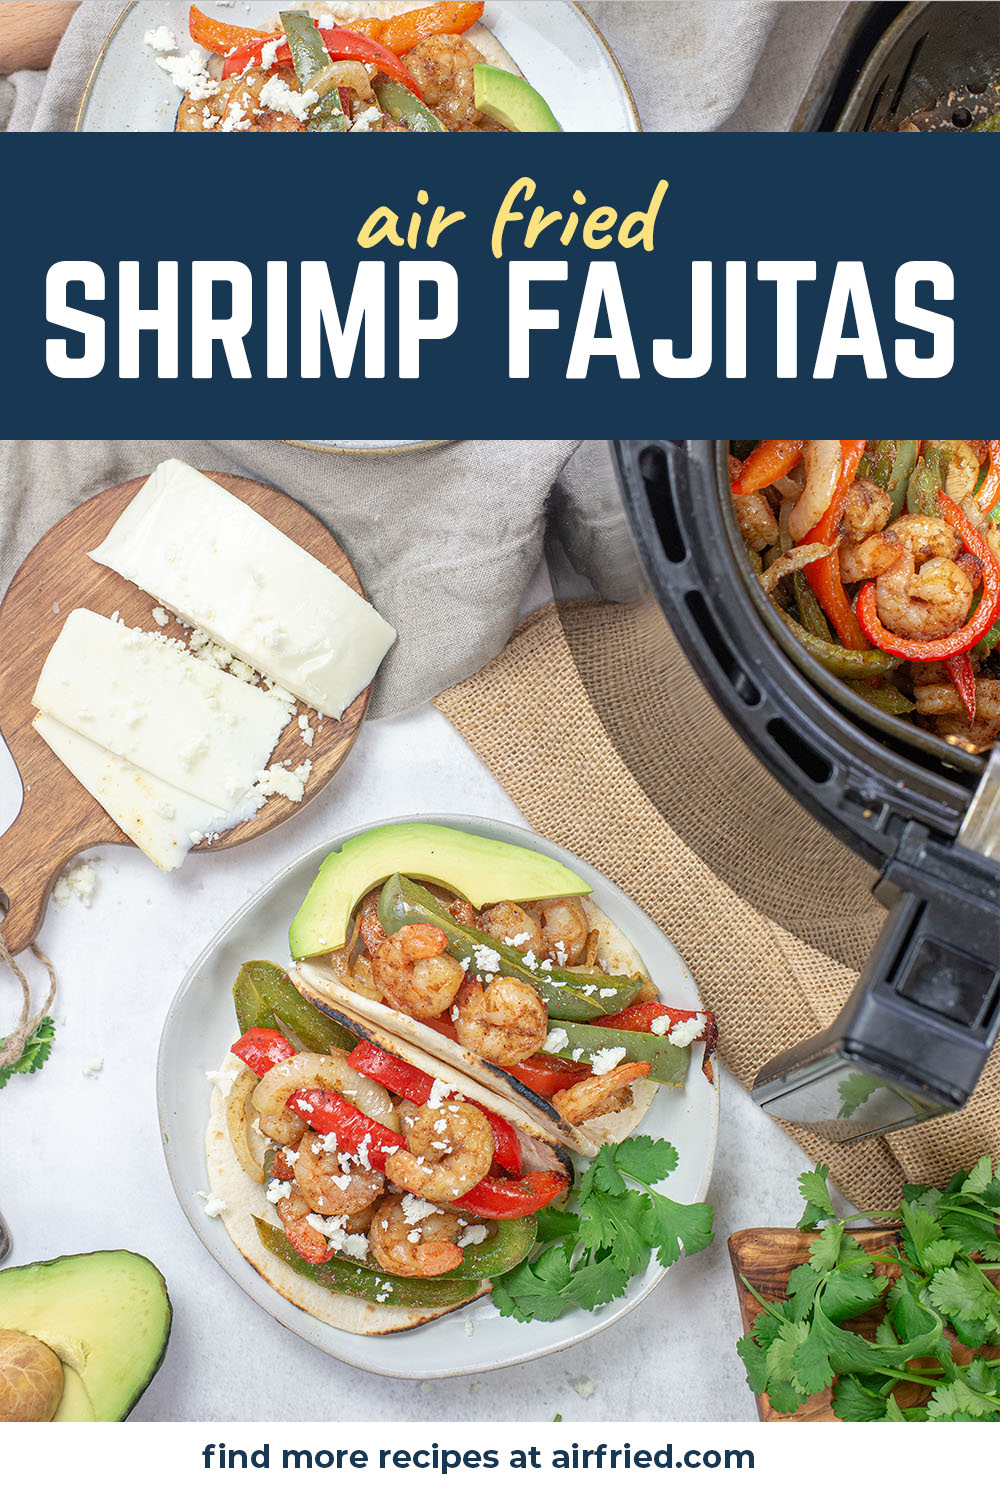 The air fryer is a great way to bring together all the ingredients of a shrimp fajita and cook them together!